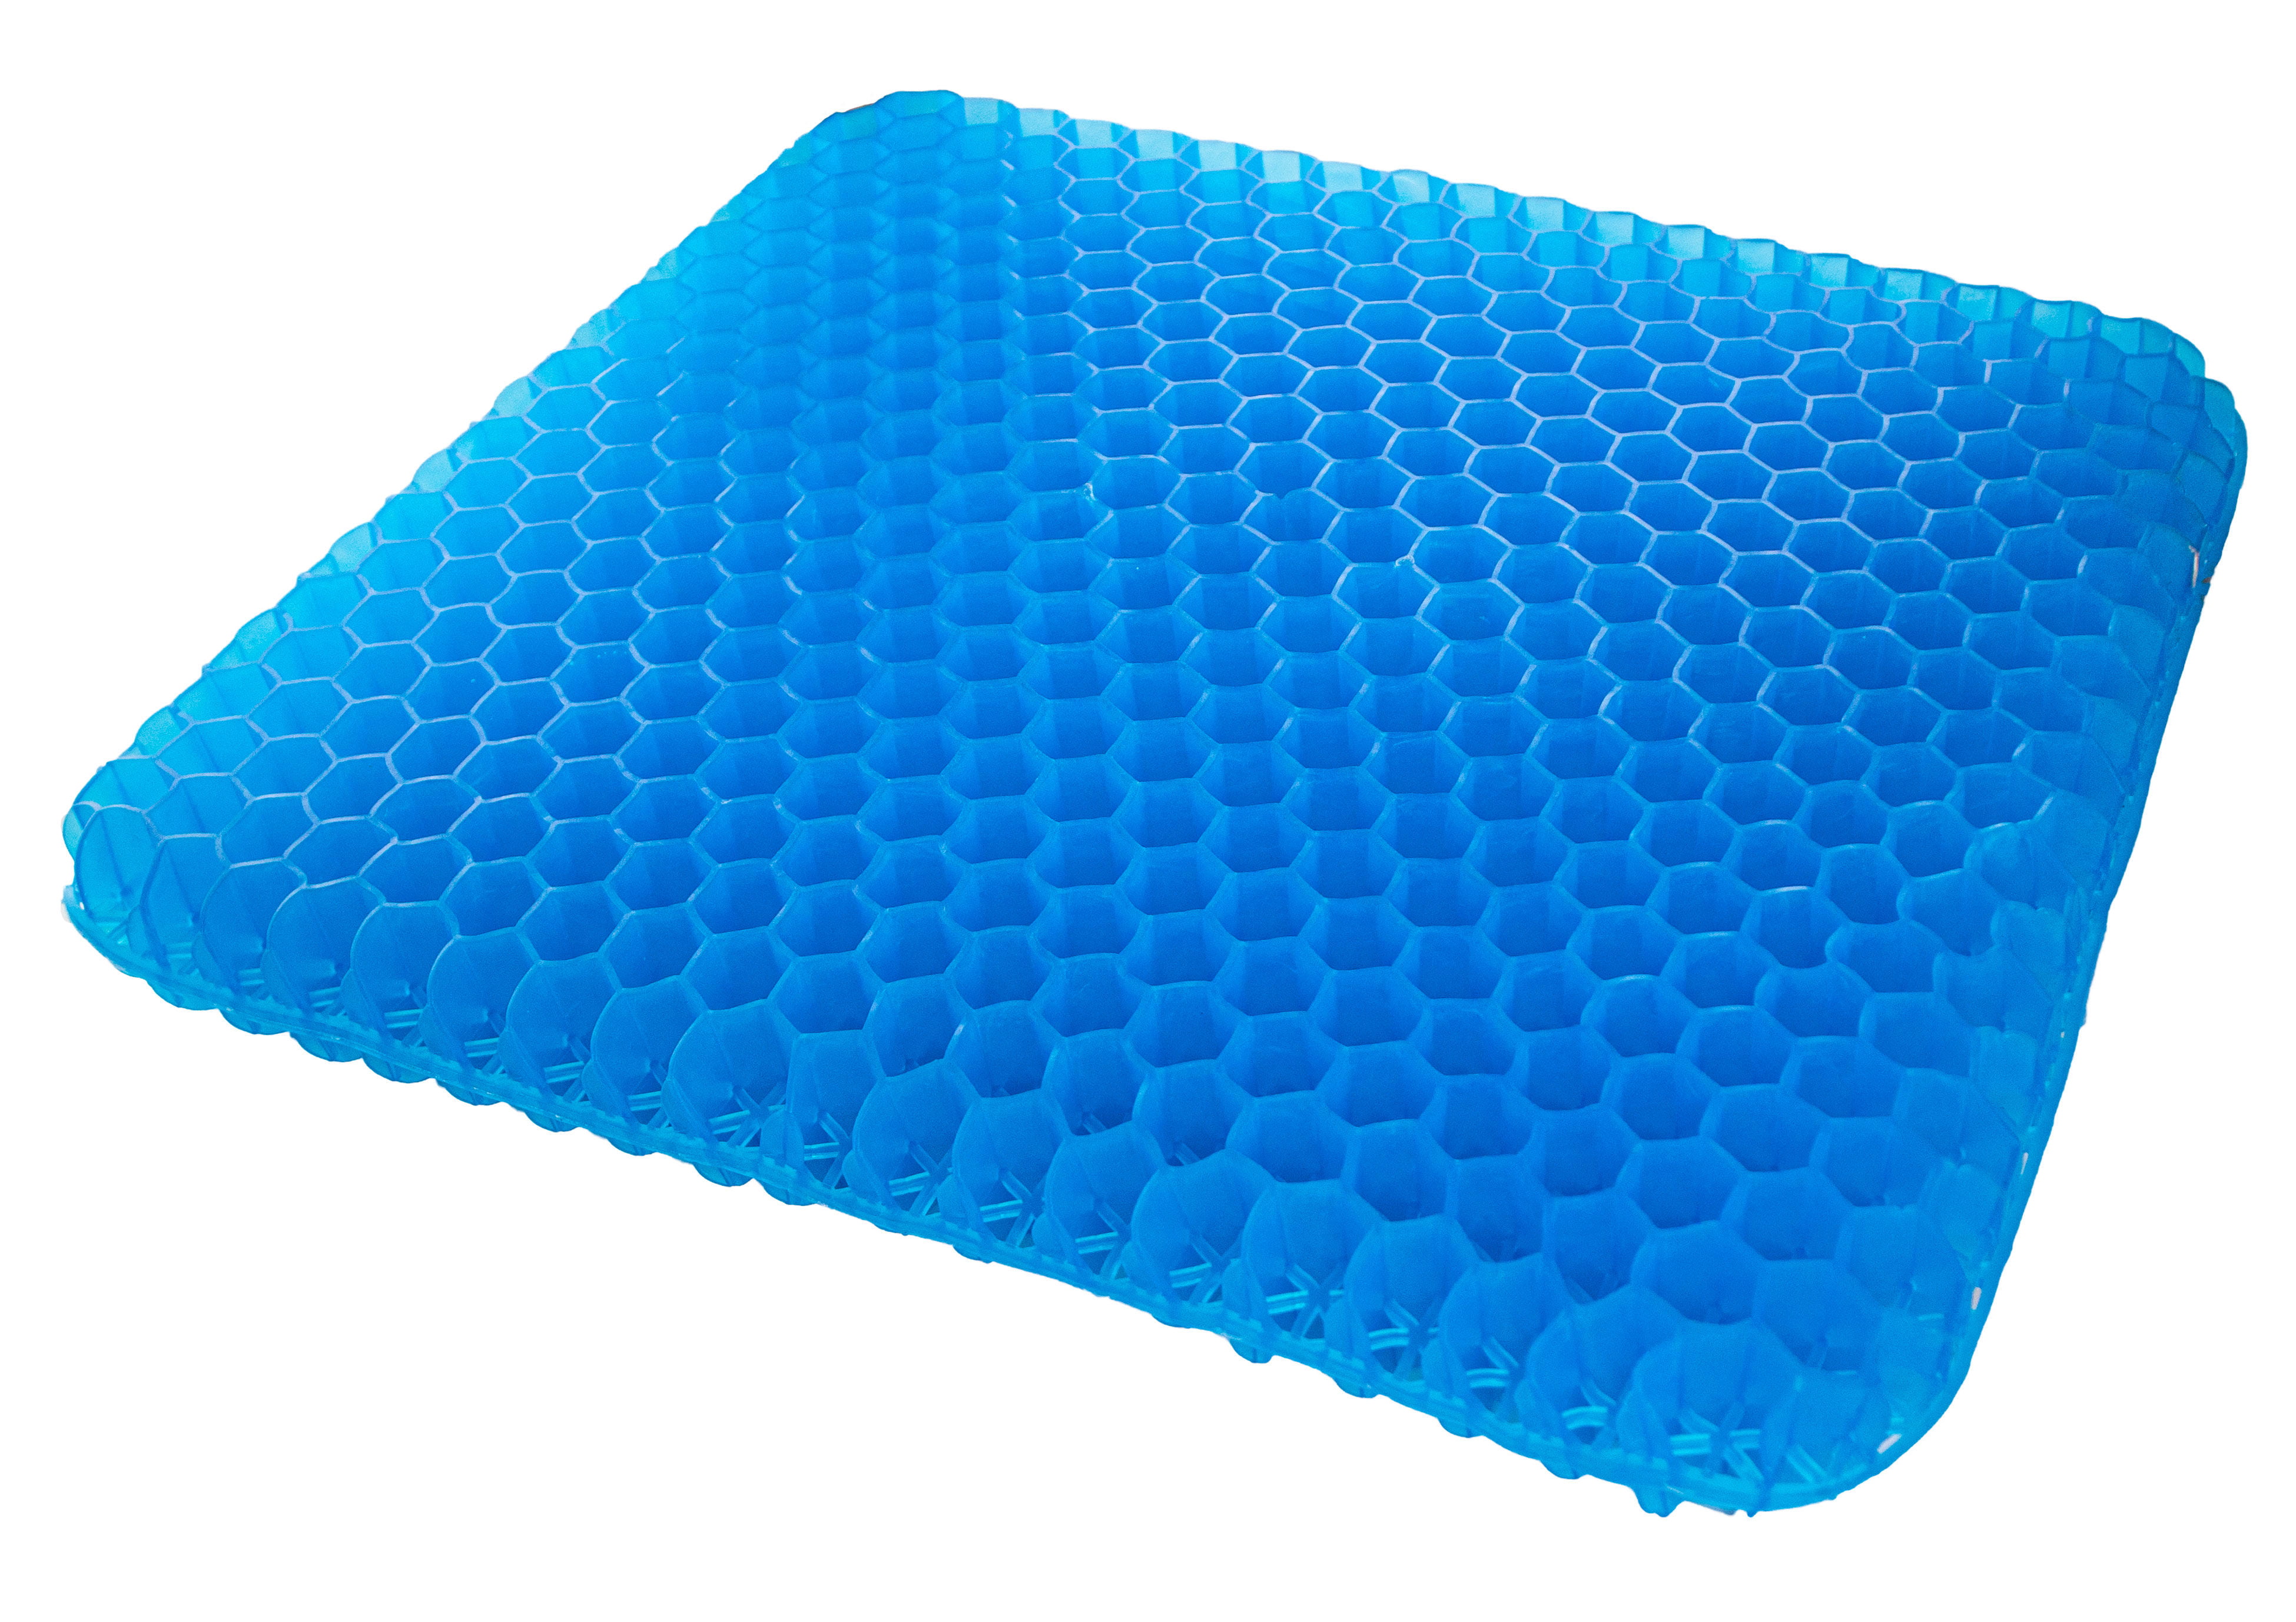 Buy Egg Sitter Seat Cushion With Non Slip Cover Breathable Honeycomb Design  Absorbs Pressure Points Enhanced Version Combination Blue 37 X 35.5 X 5cm  Online